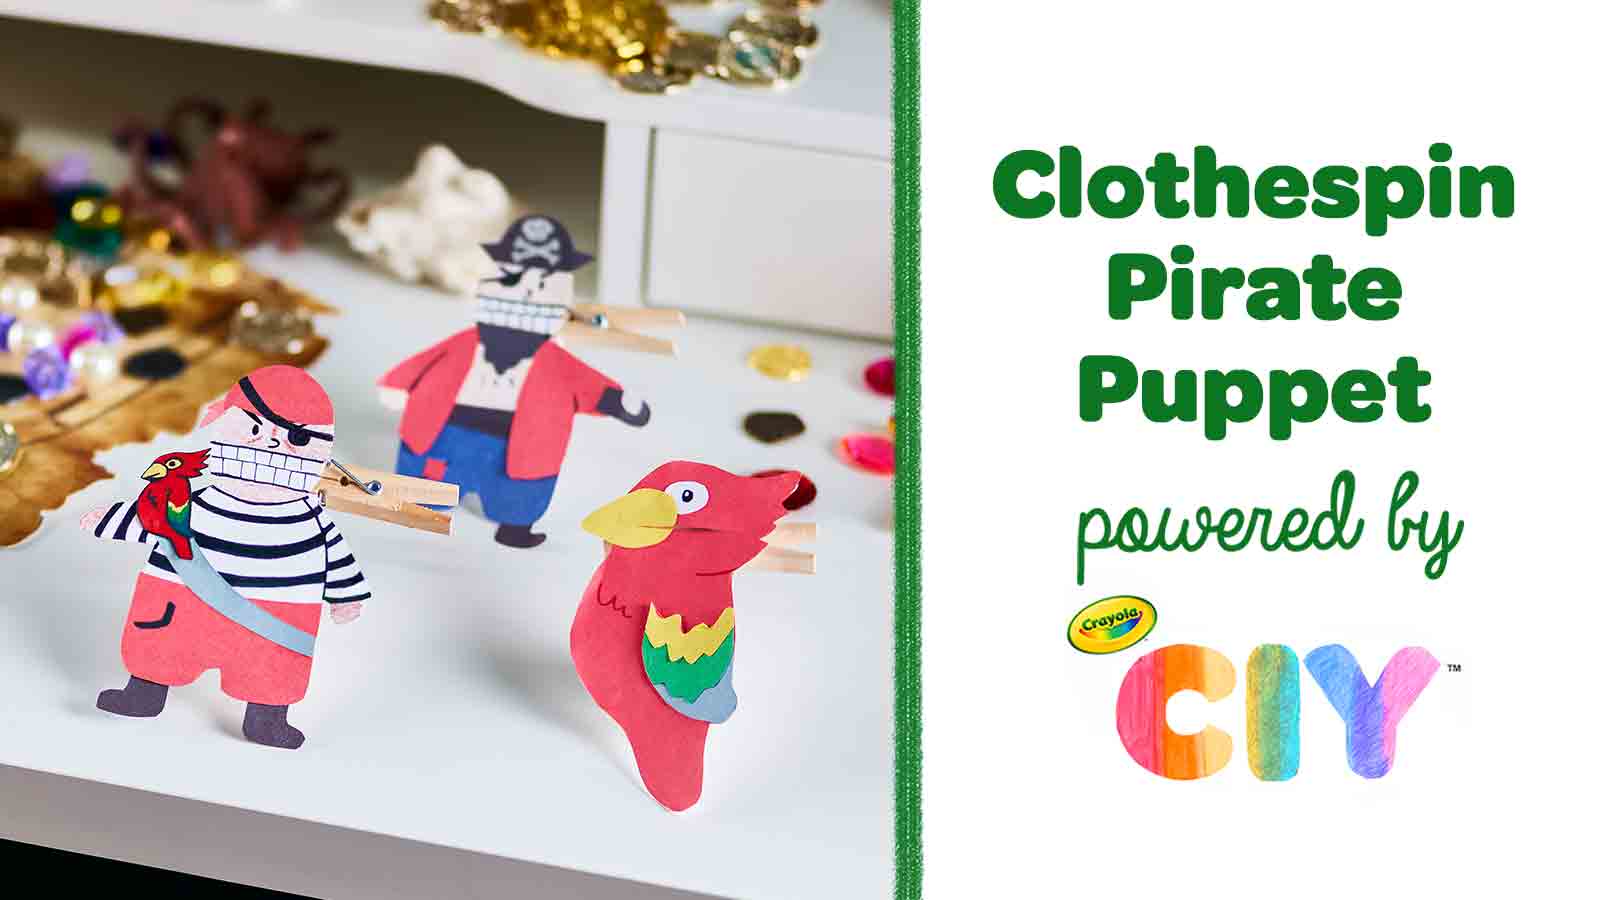 Clothespin-Pirate-Puppet_Poster-Frame